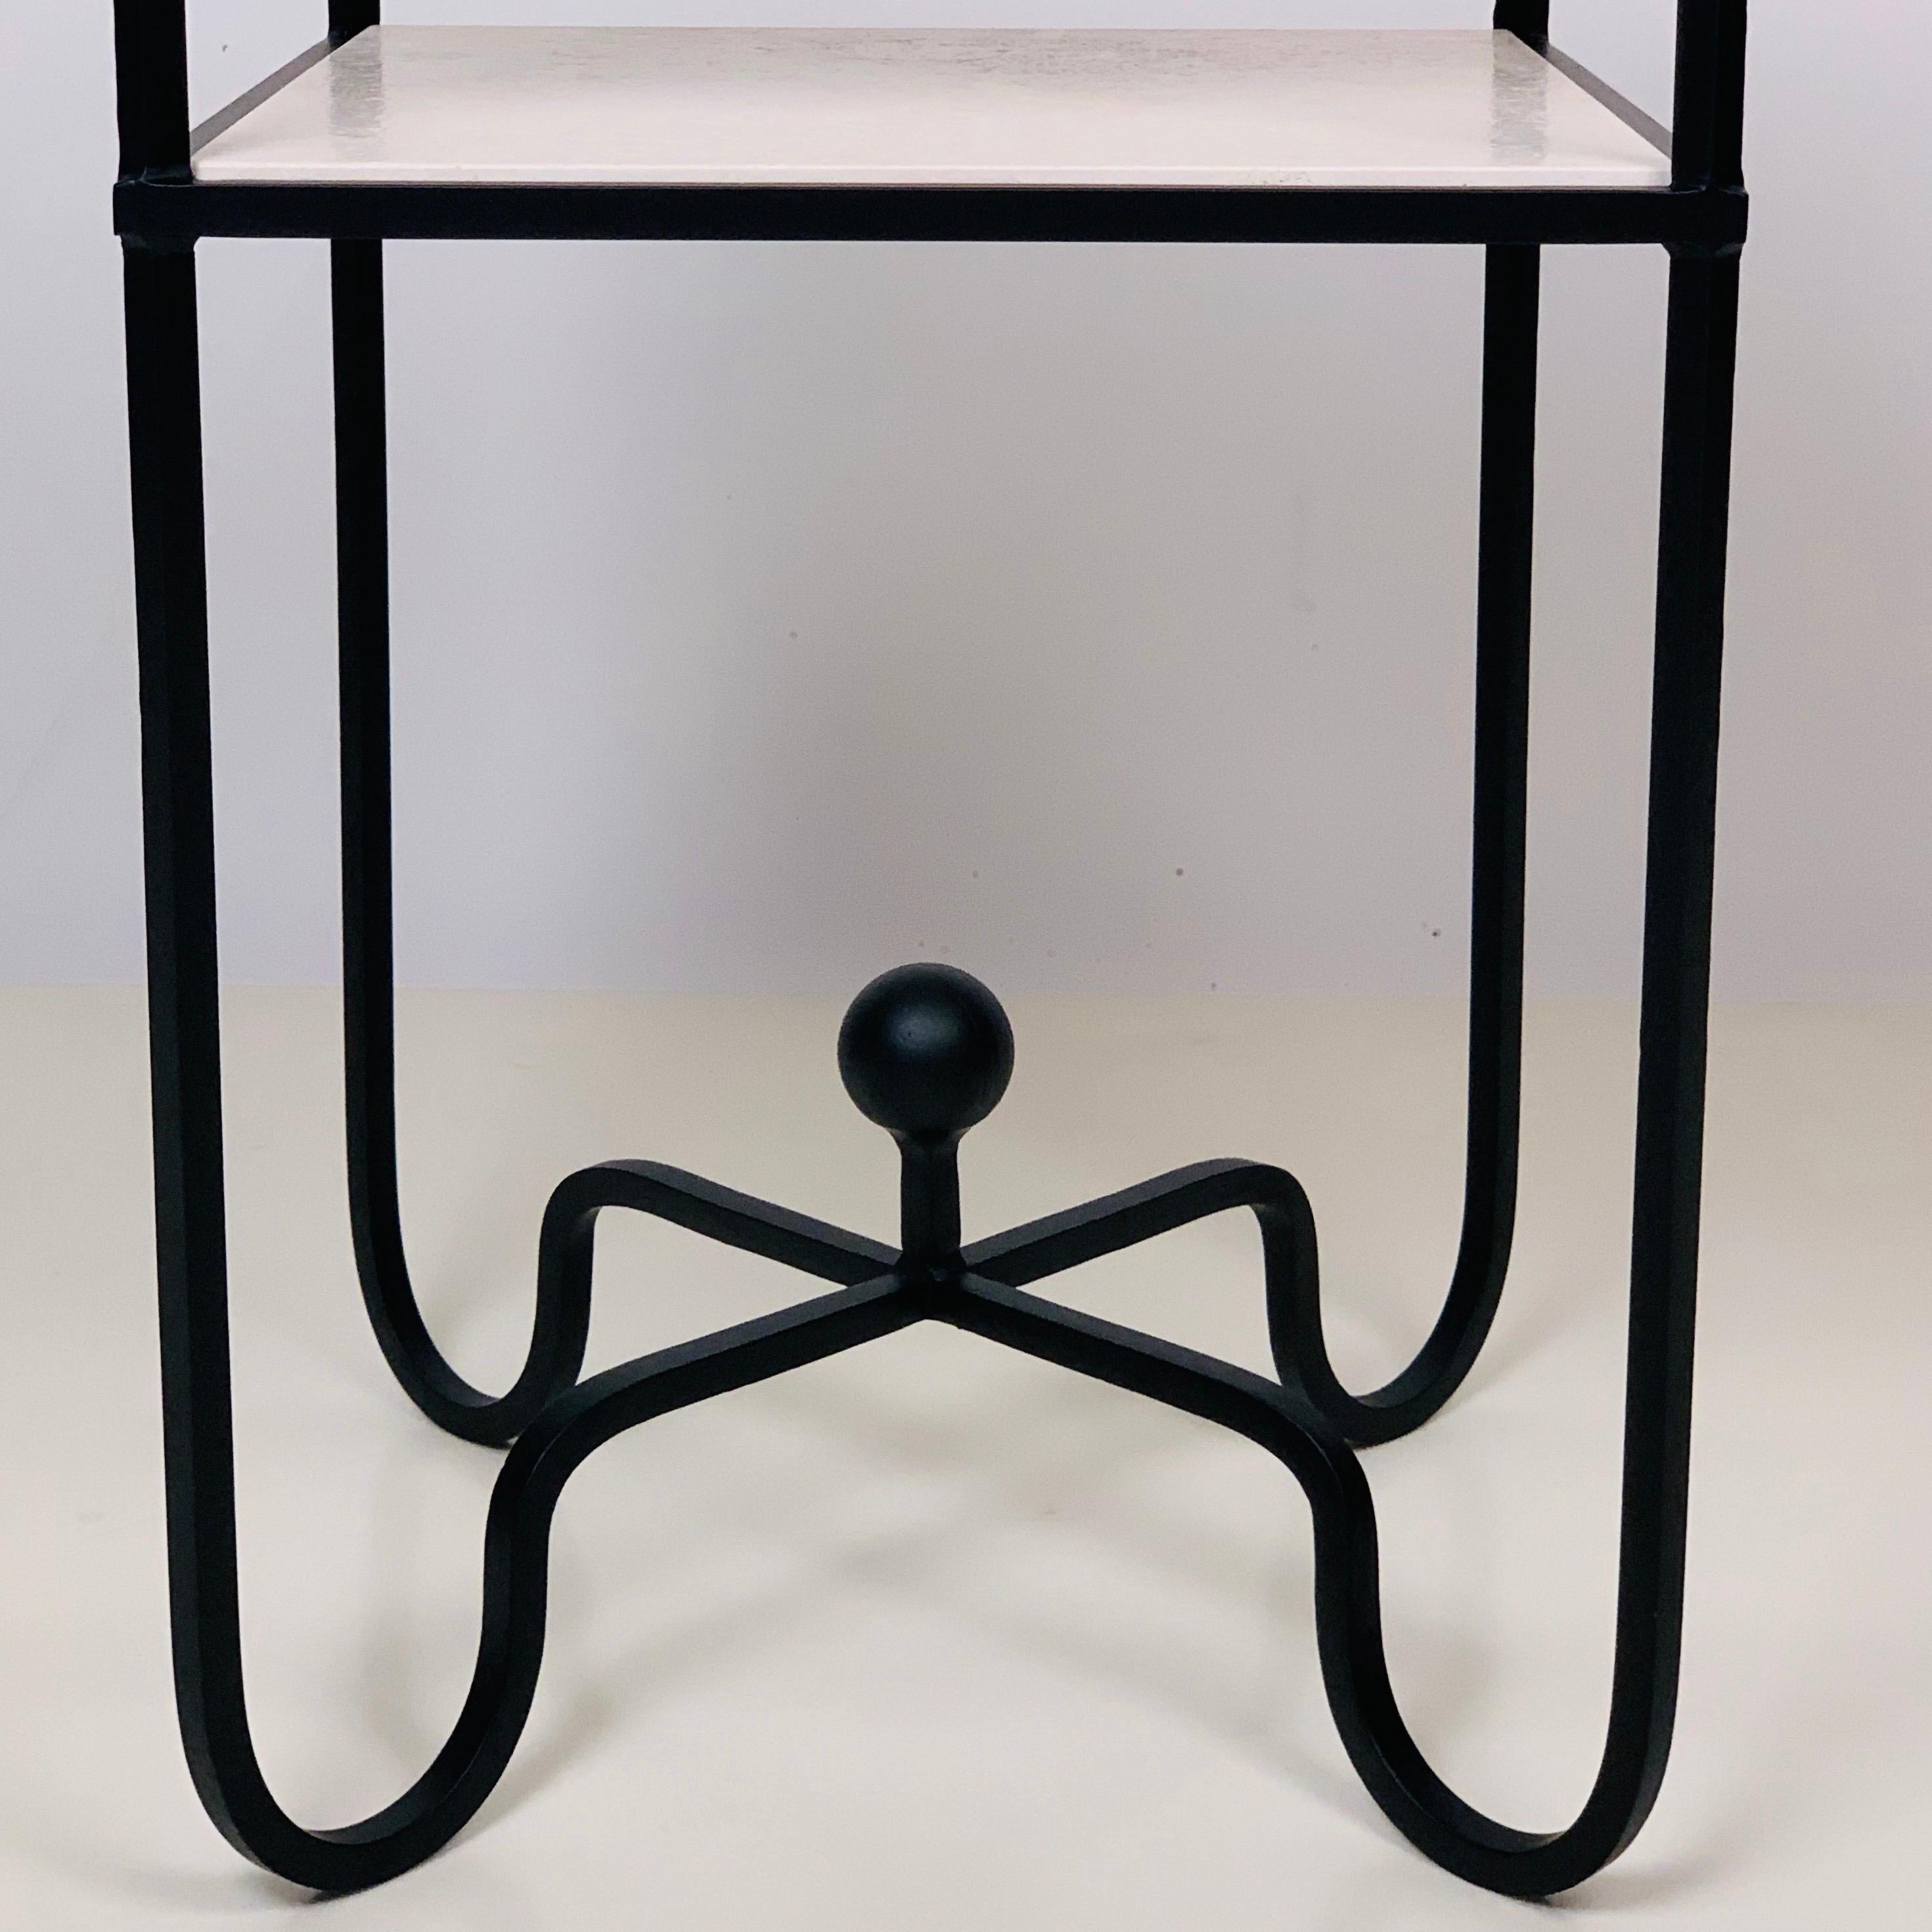 Polished 2-Tier Entretoise Side Table by Design Frères For Sale